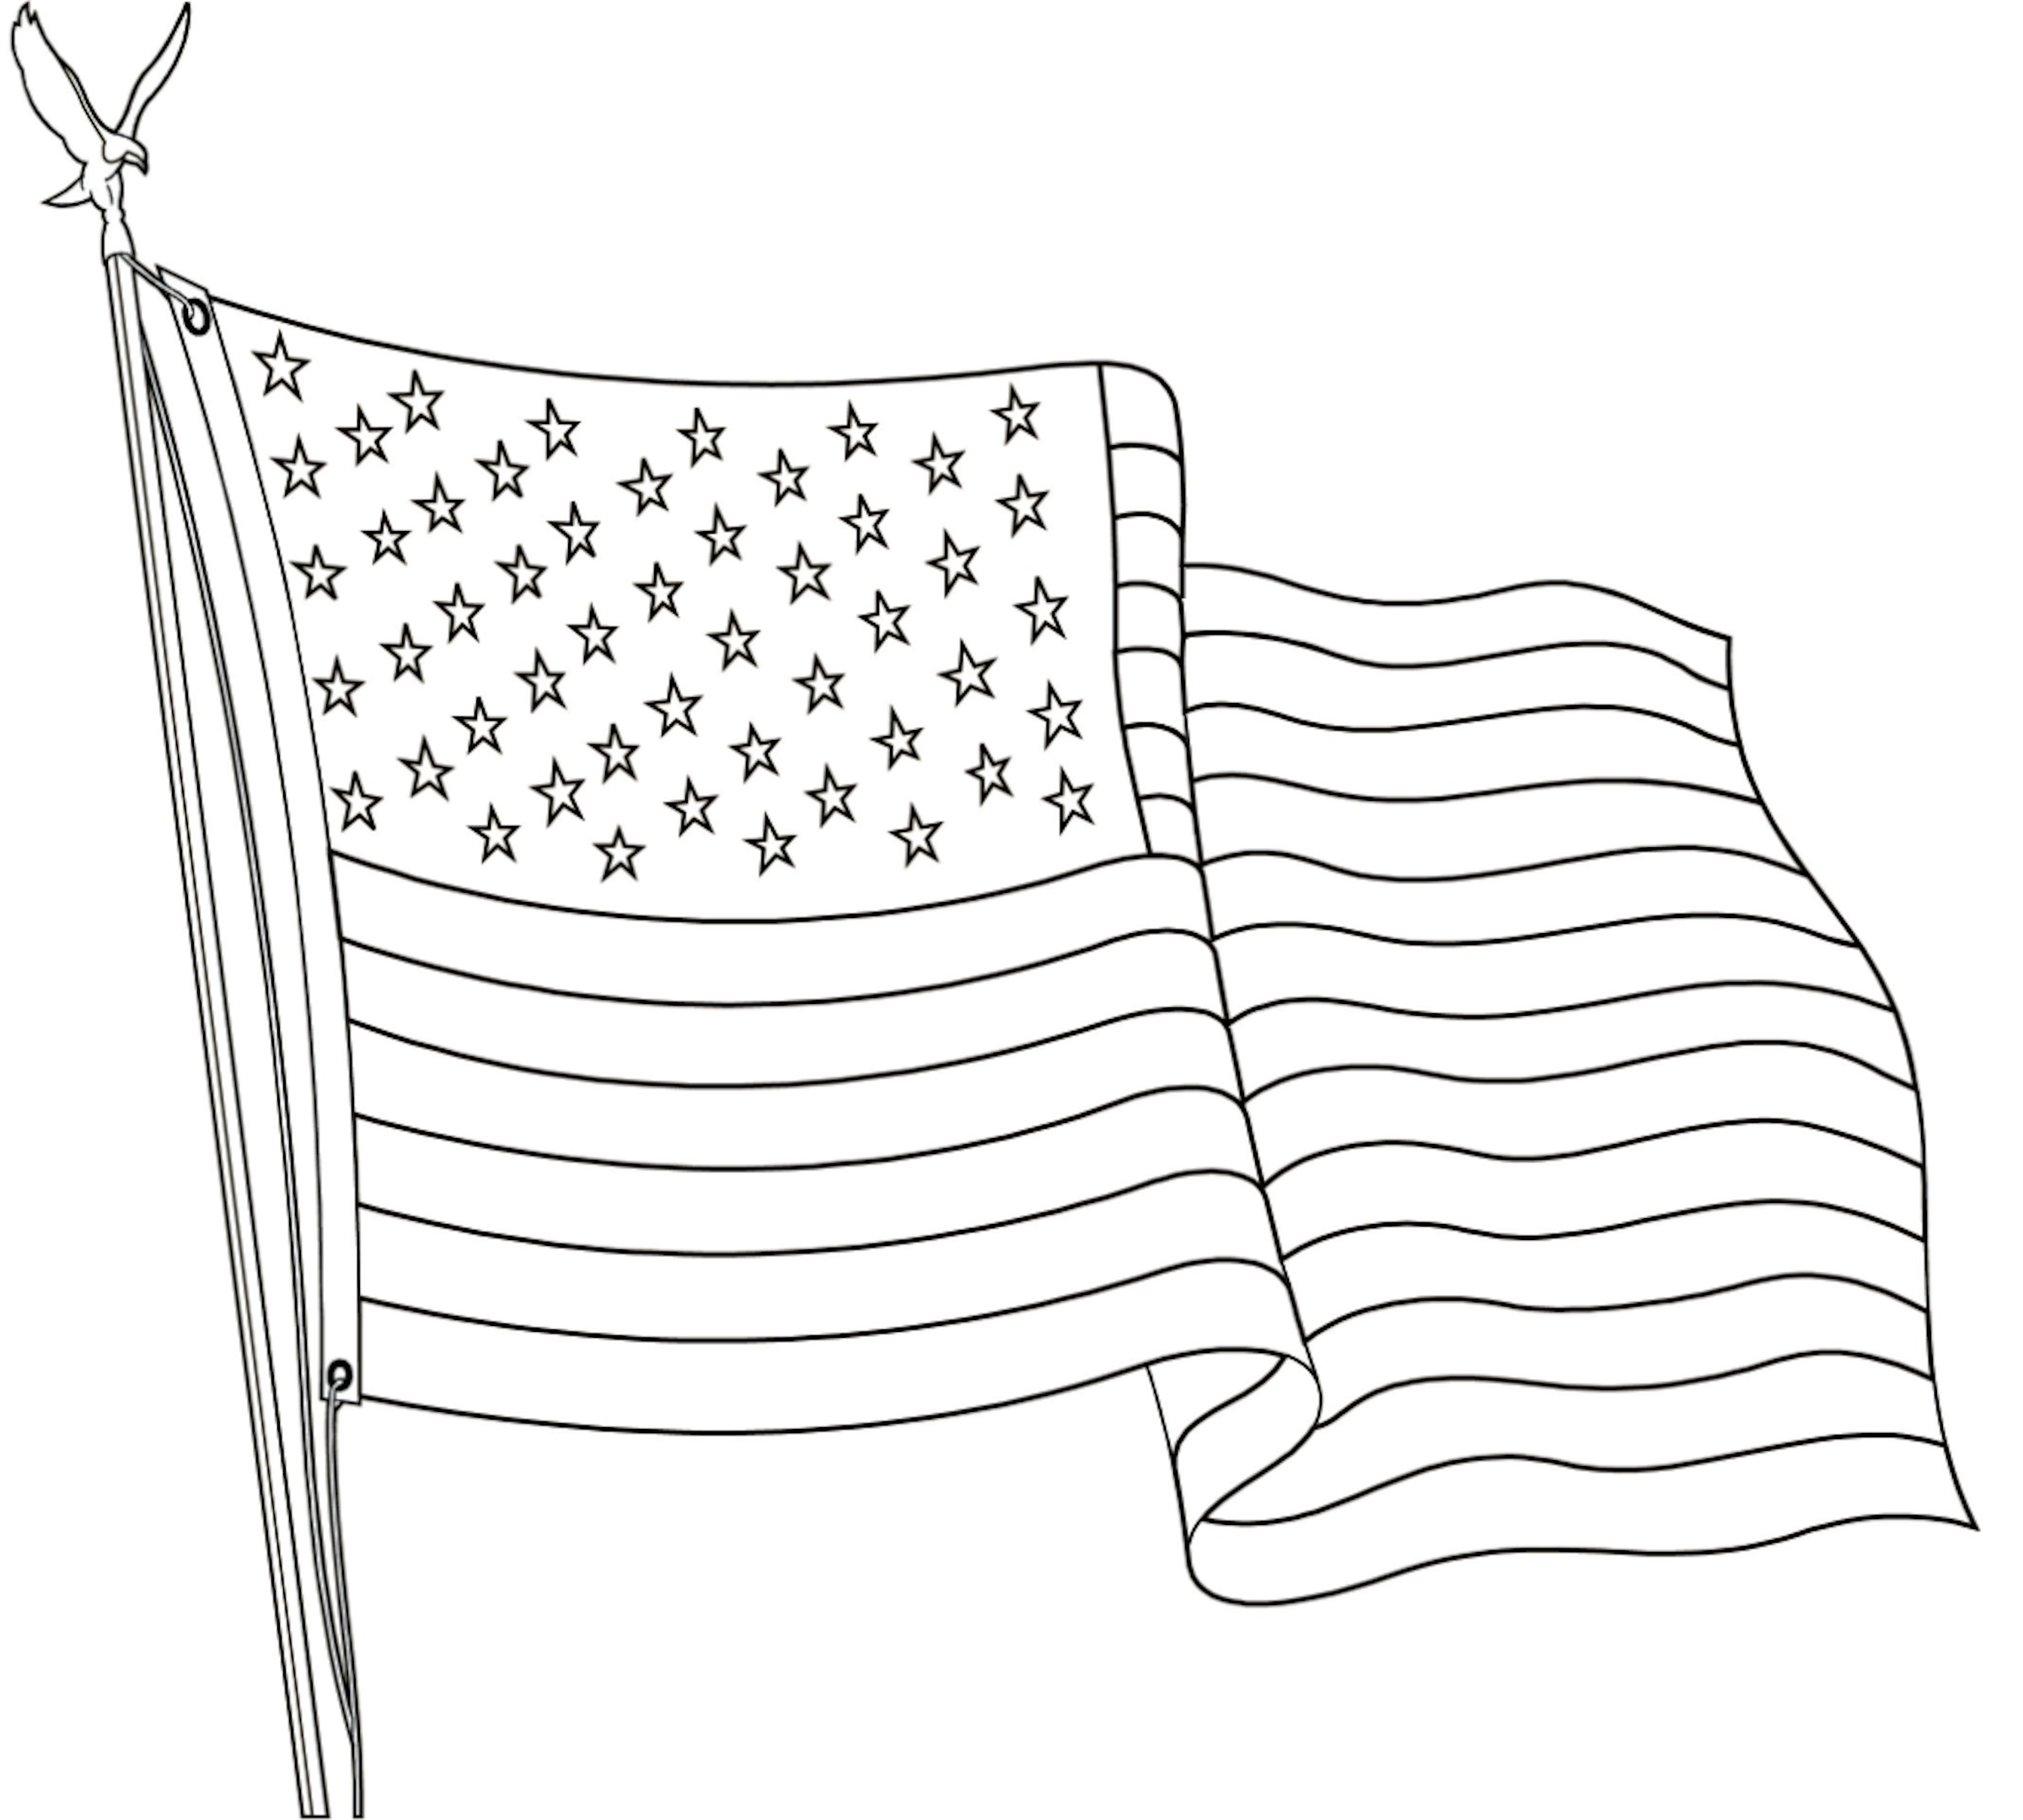 coloring page of the american flag